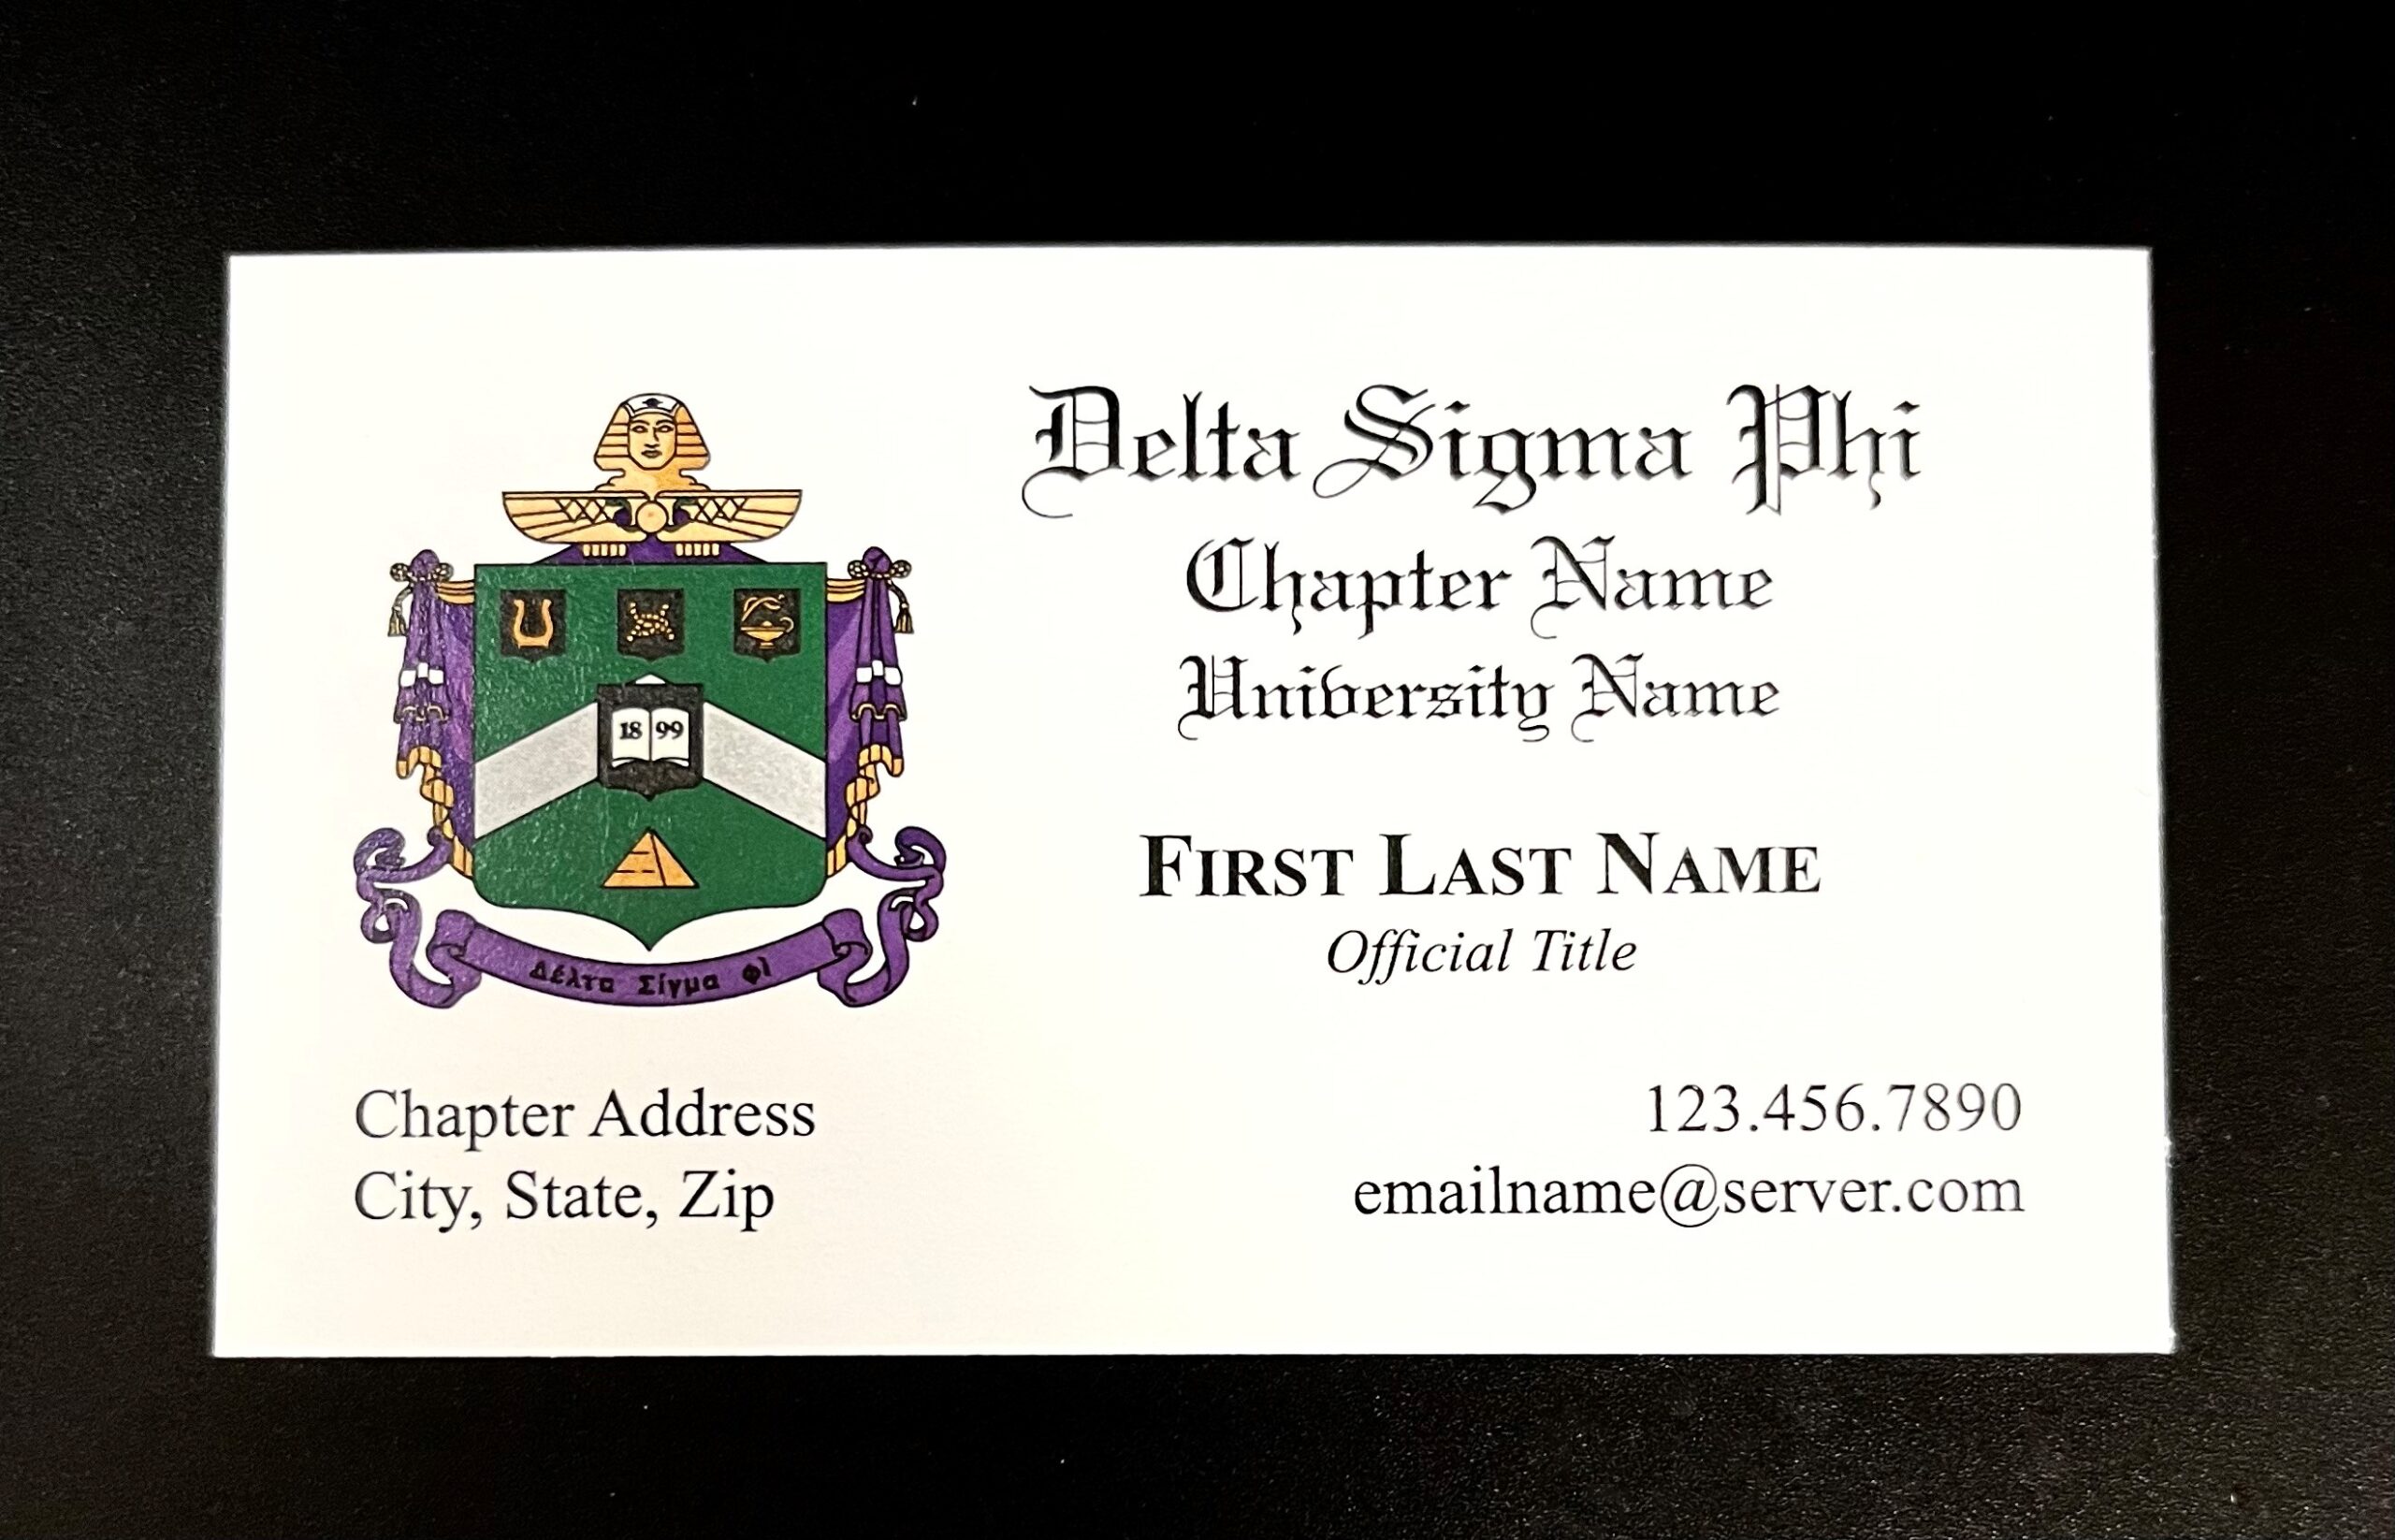 Business Cards Delta Sigma Phi